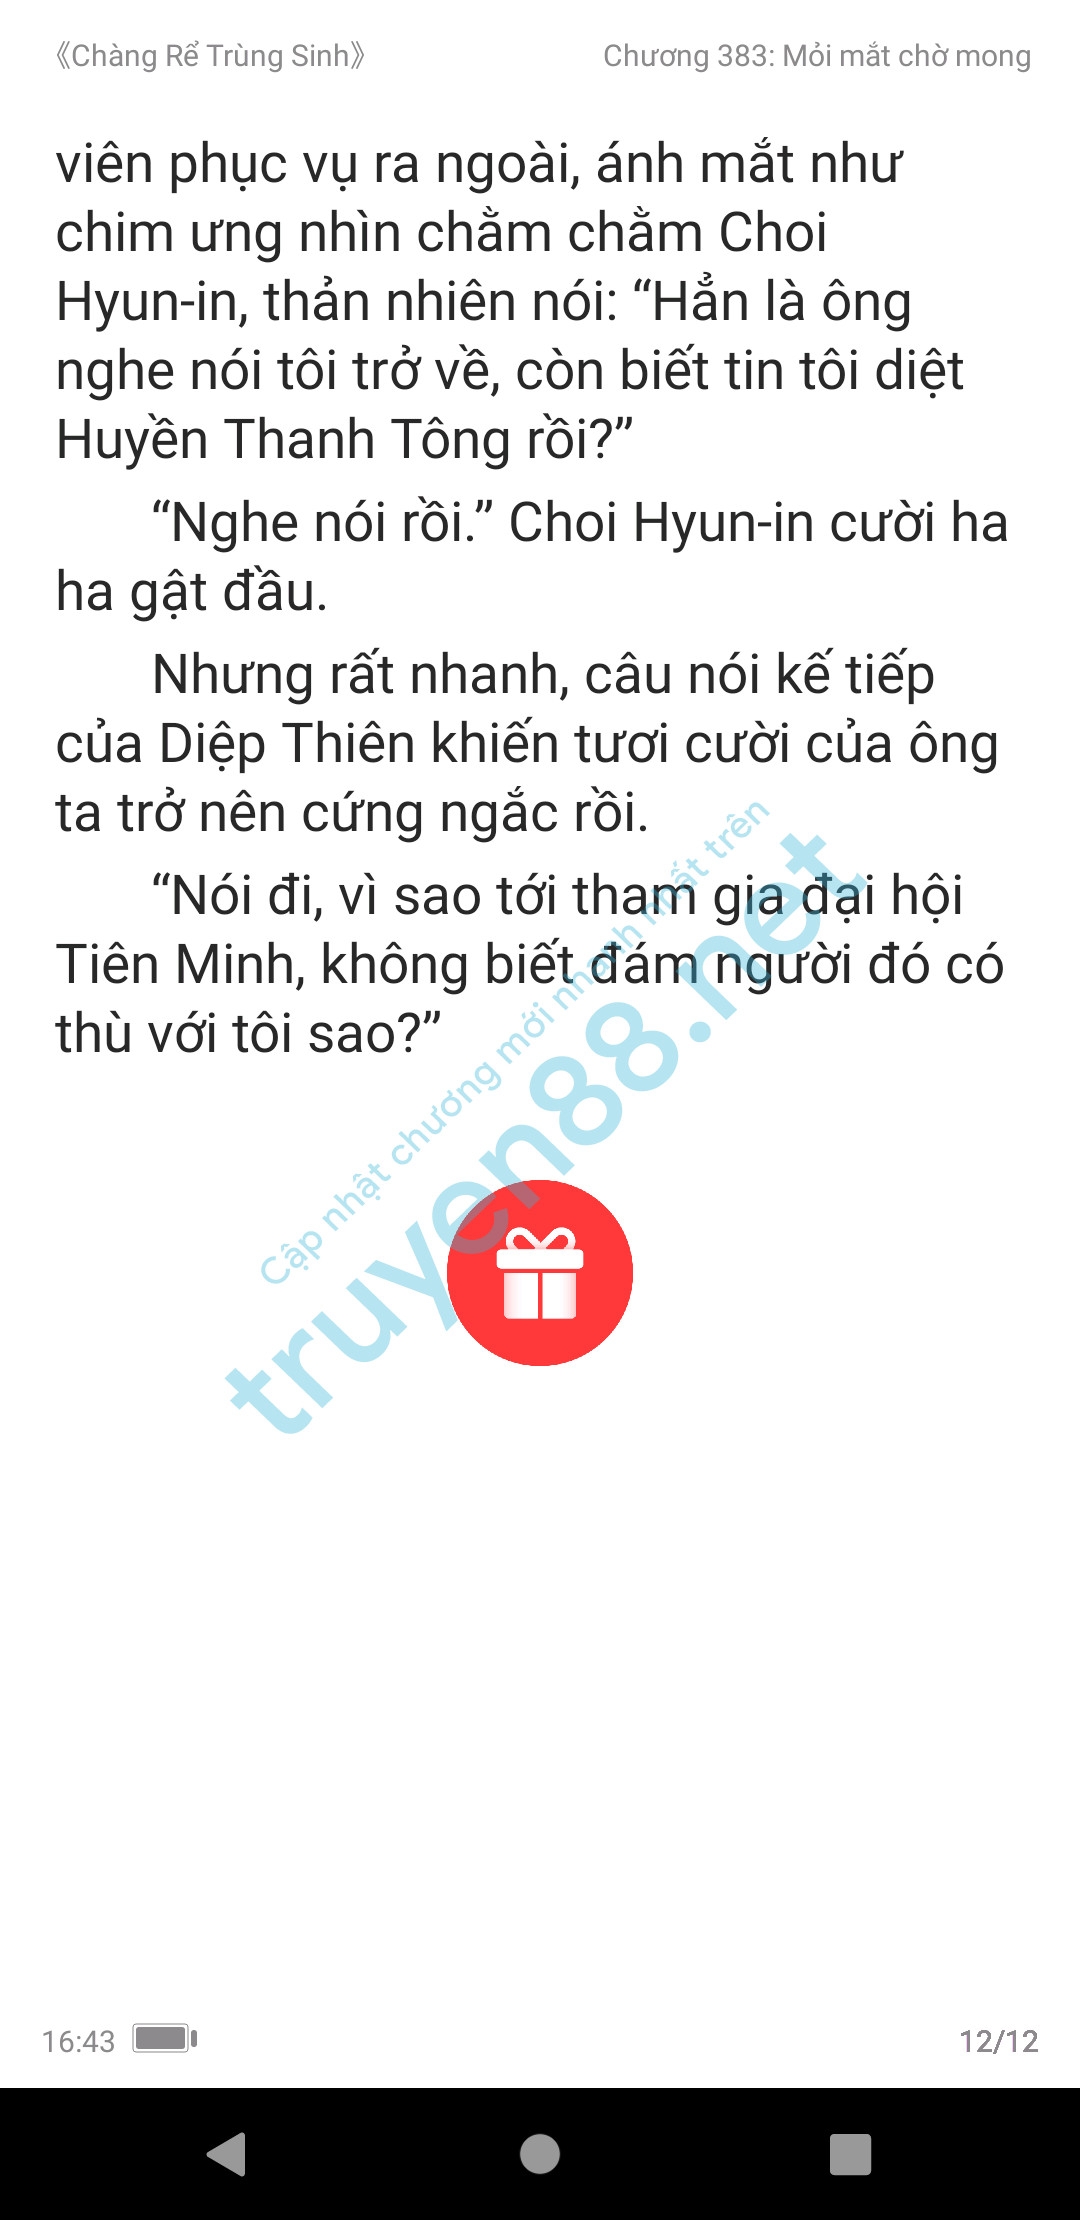 chang-re-trung-sinh-383-1